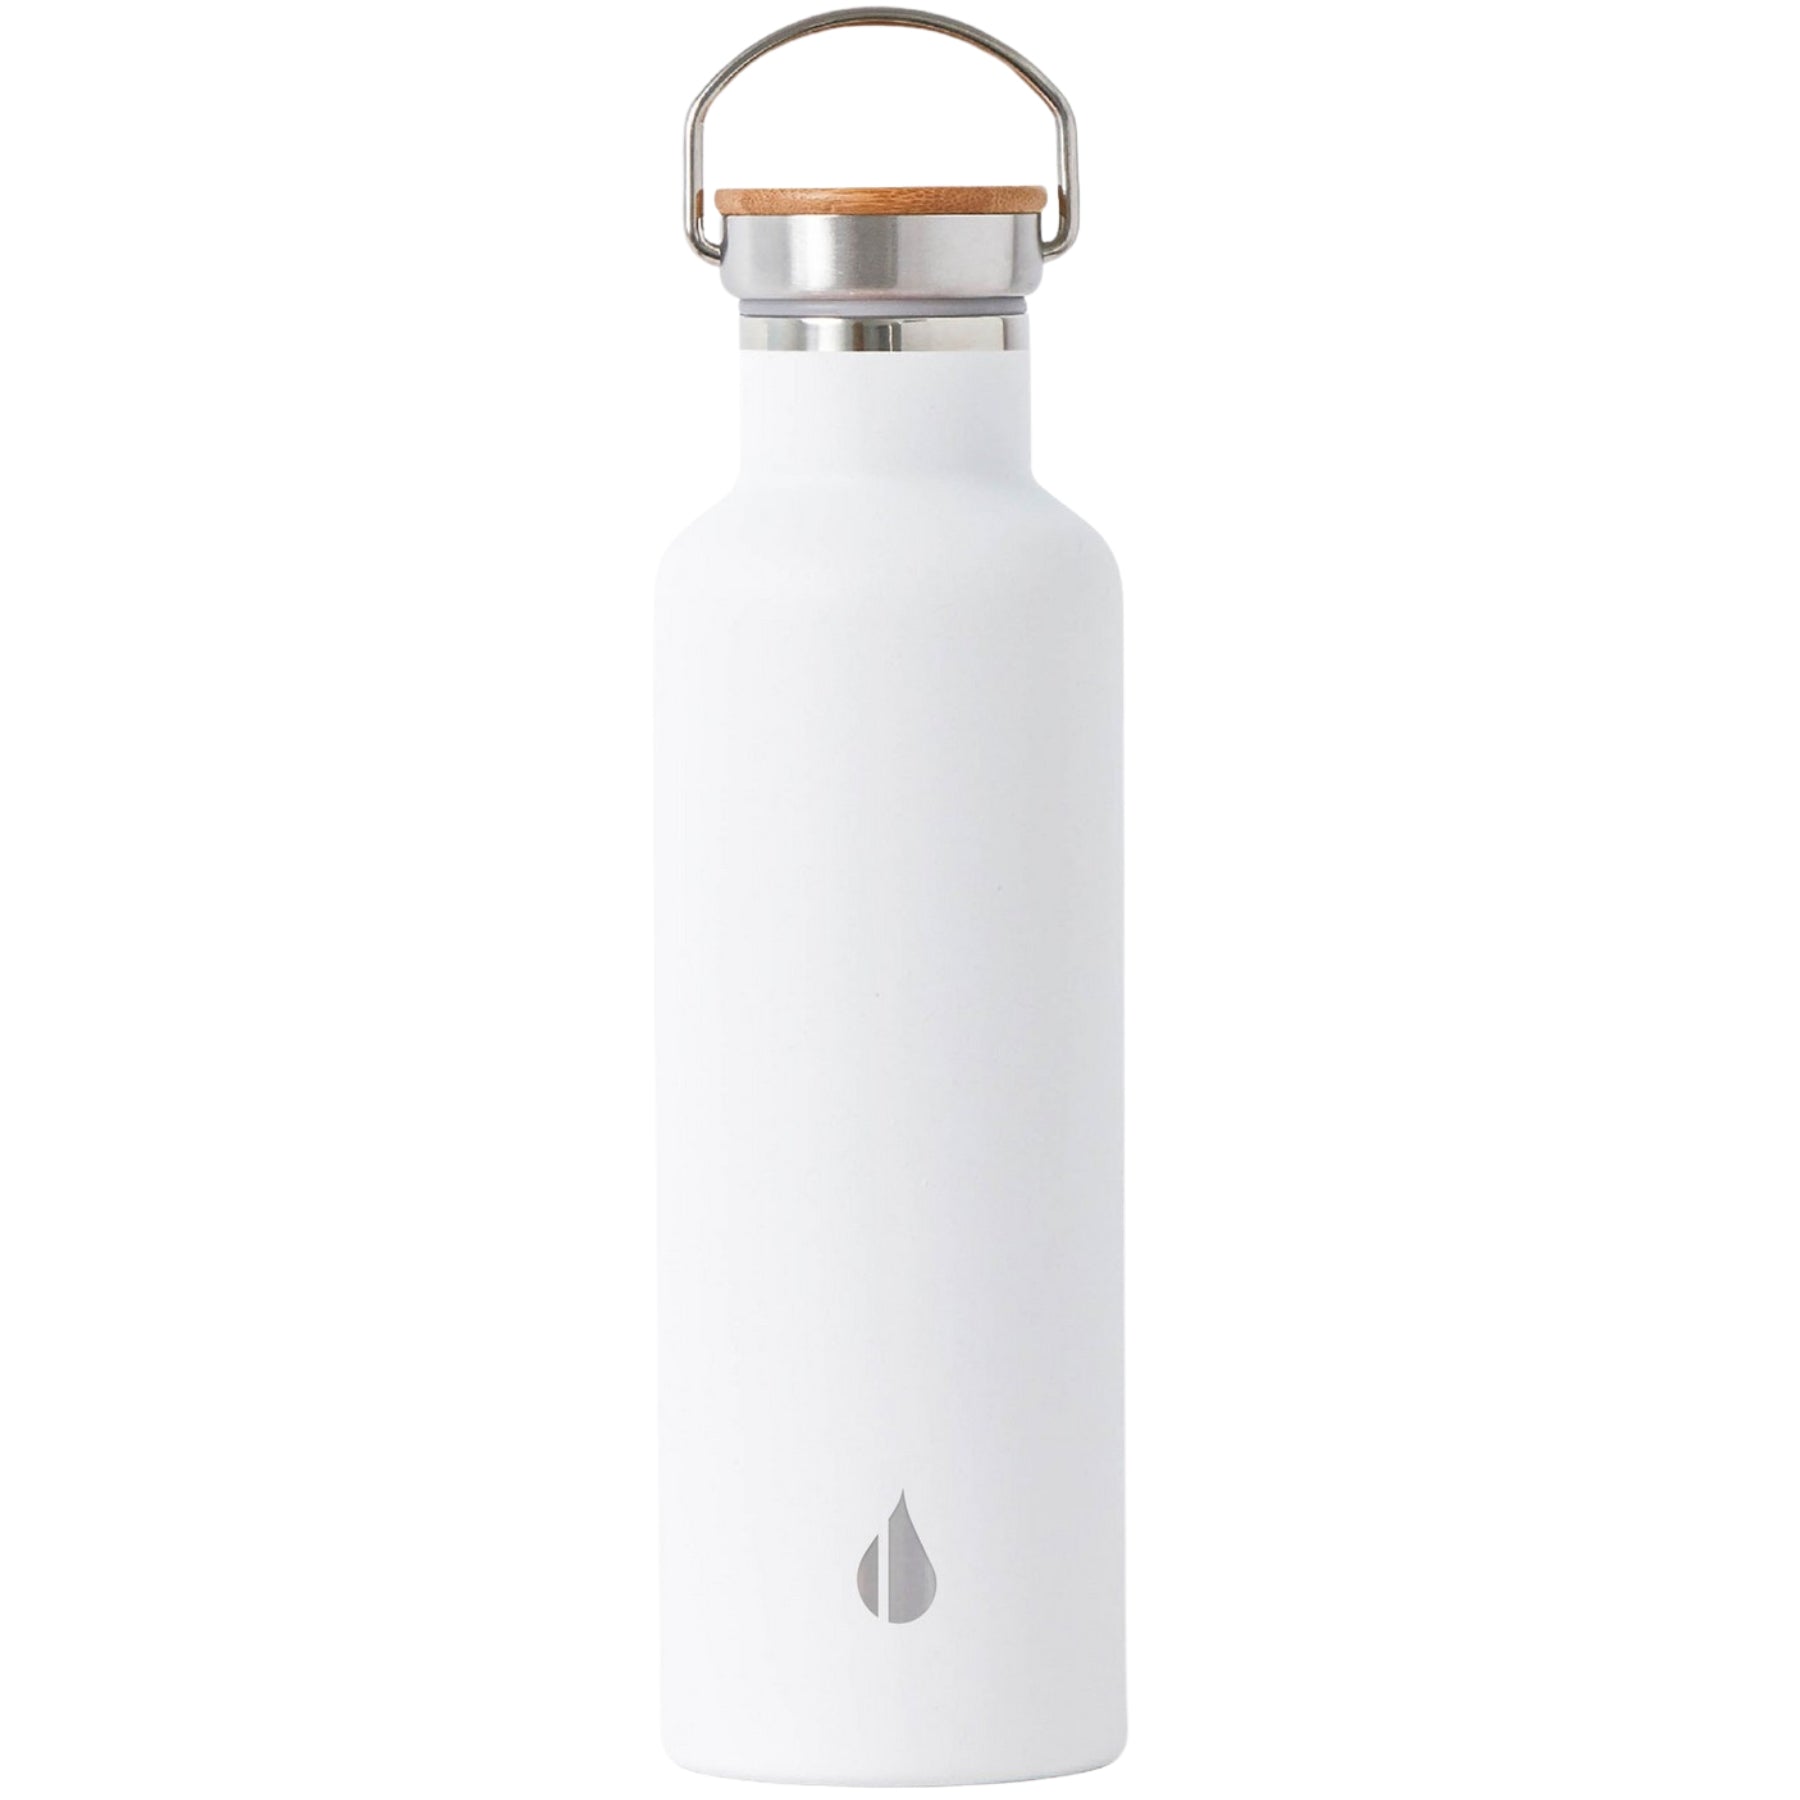 Customizable Elemental® 25 oz Stainless Steel Insulated Bottle in white